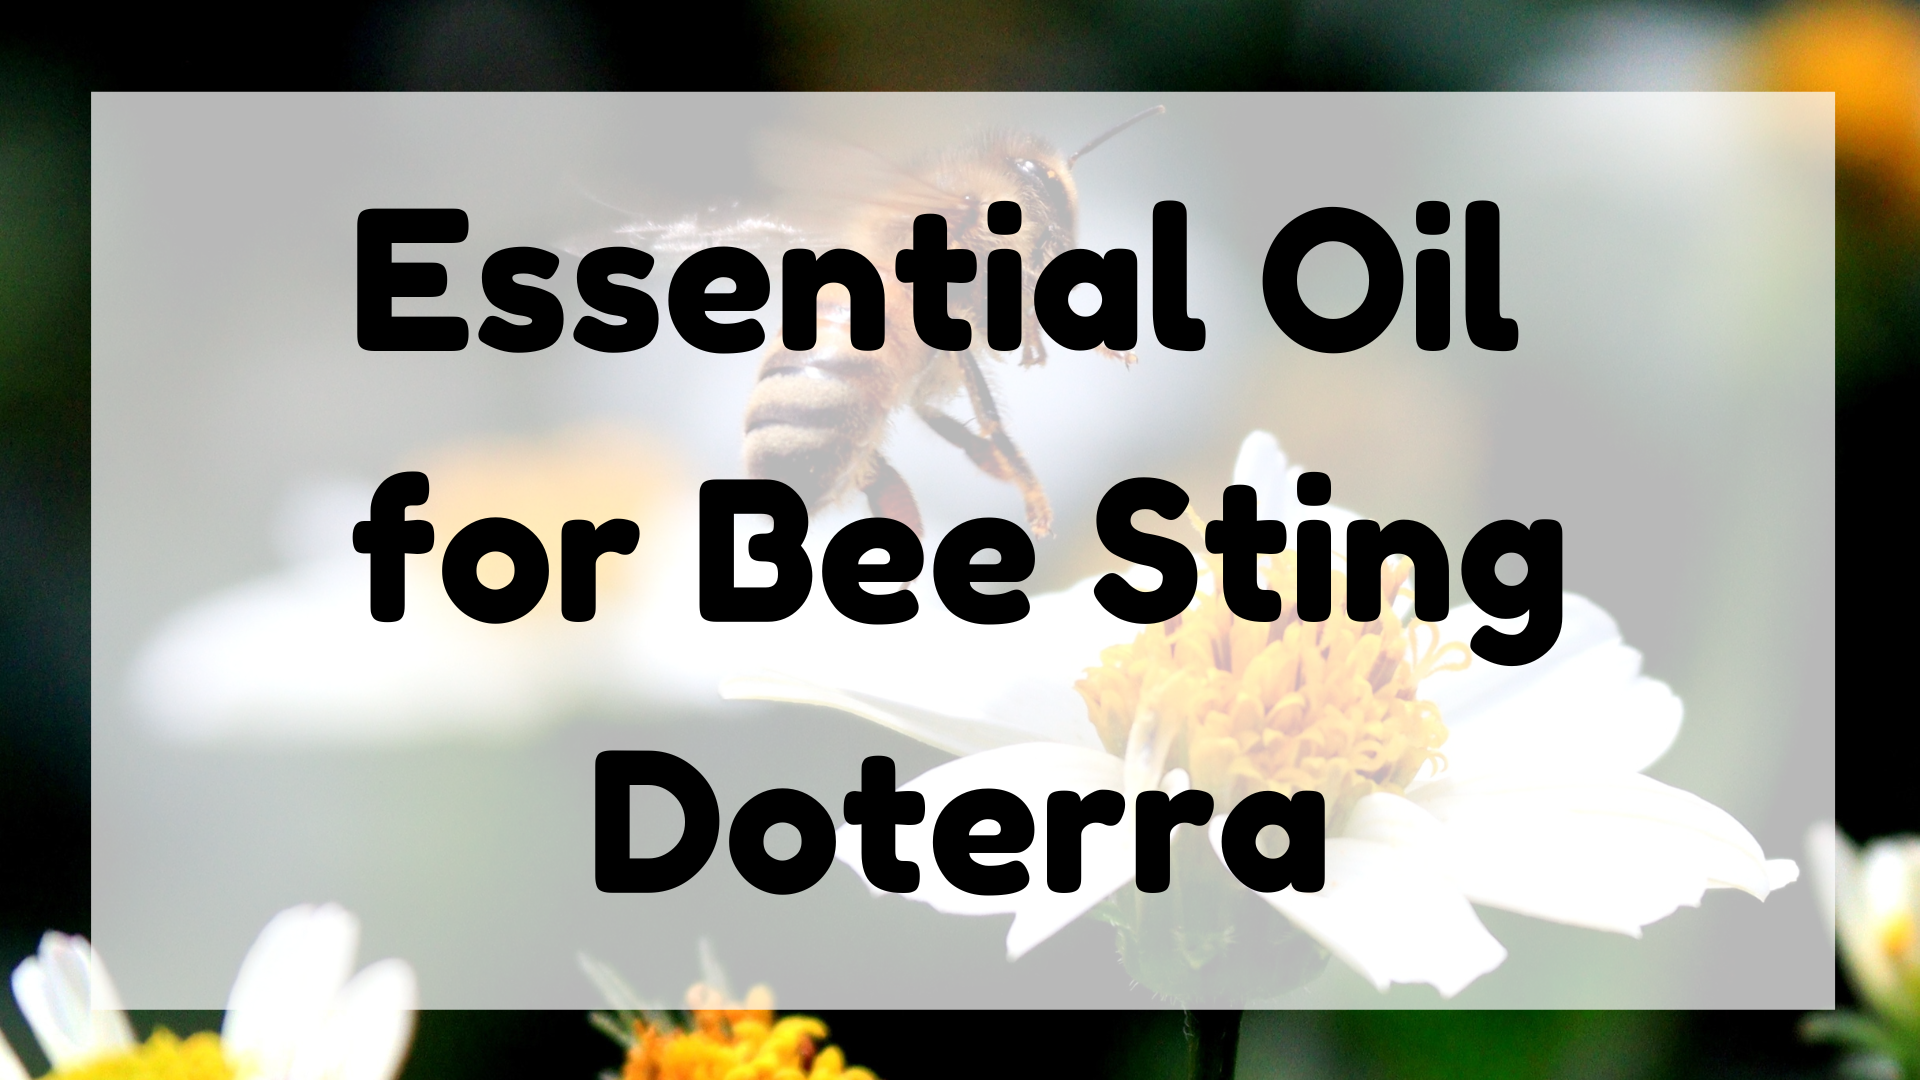 Essential Oil for Bee Sting Doterra featured image